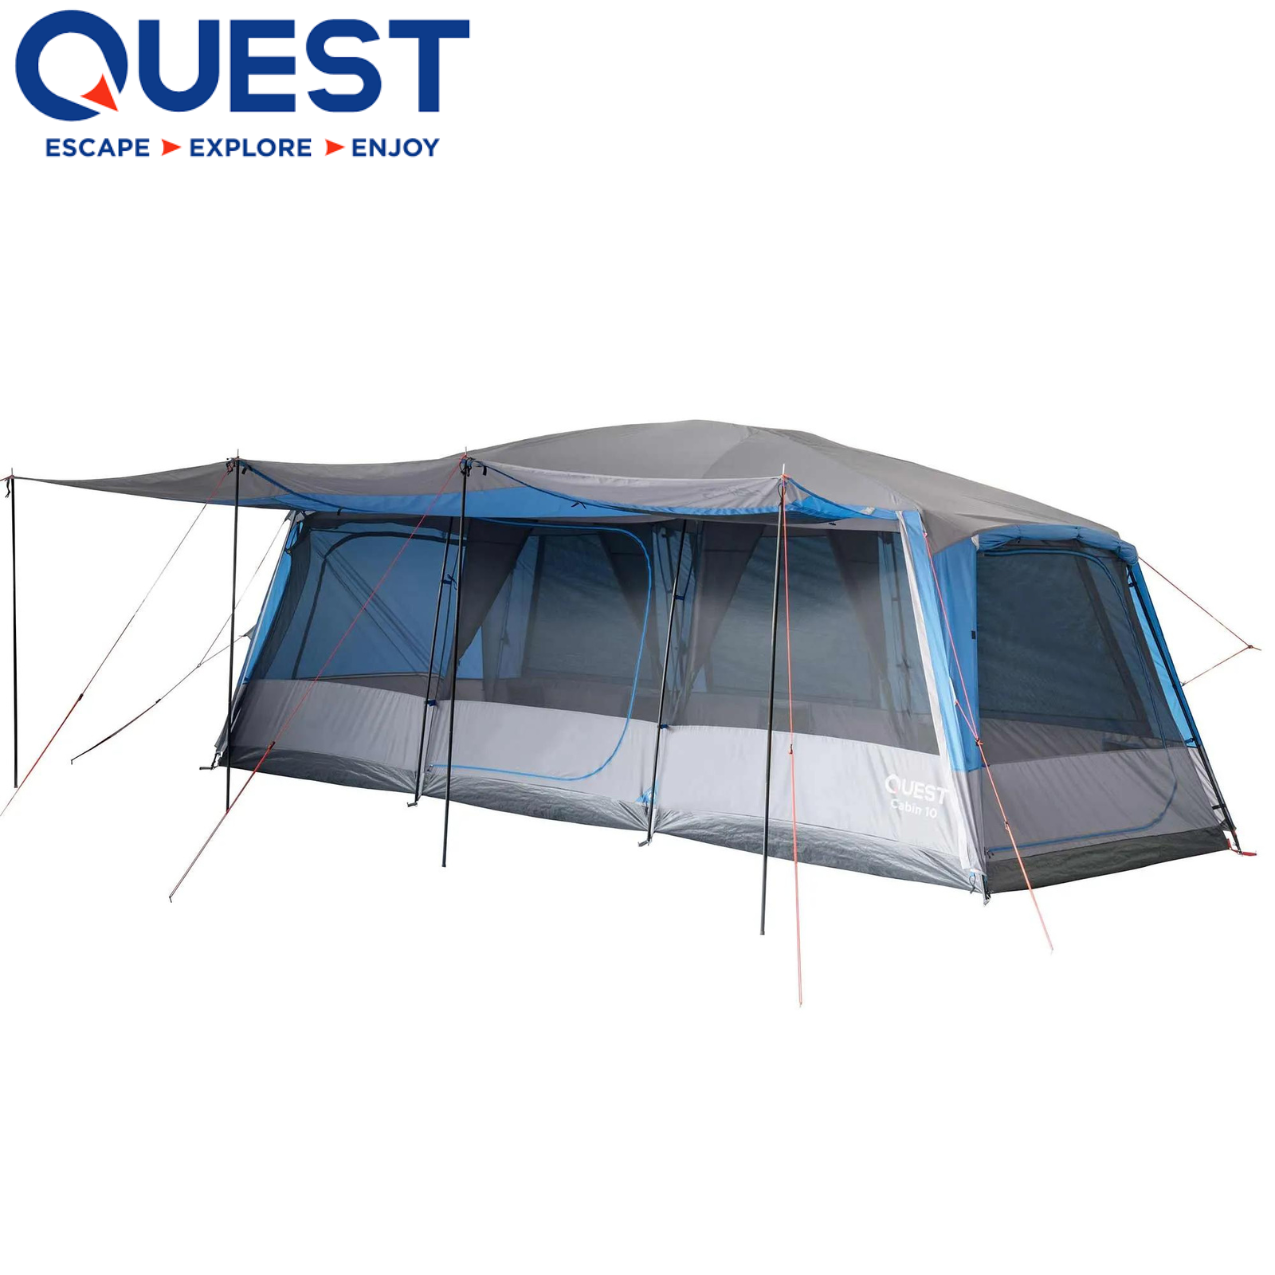 QUEST CABIN 10 TENT  Compleat Angler & Camping World Rockingham